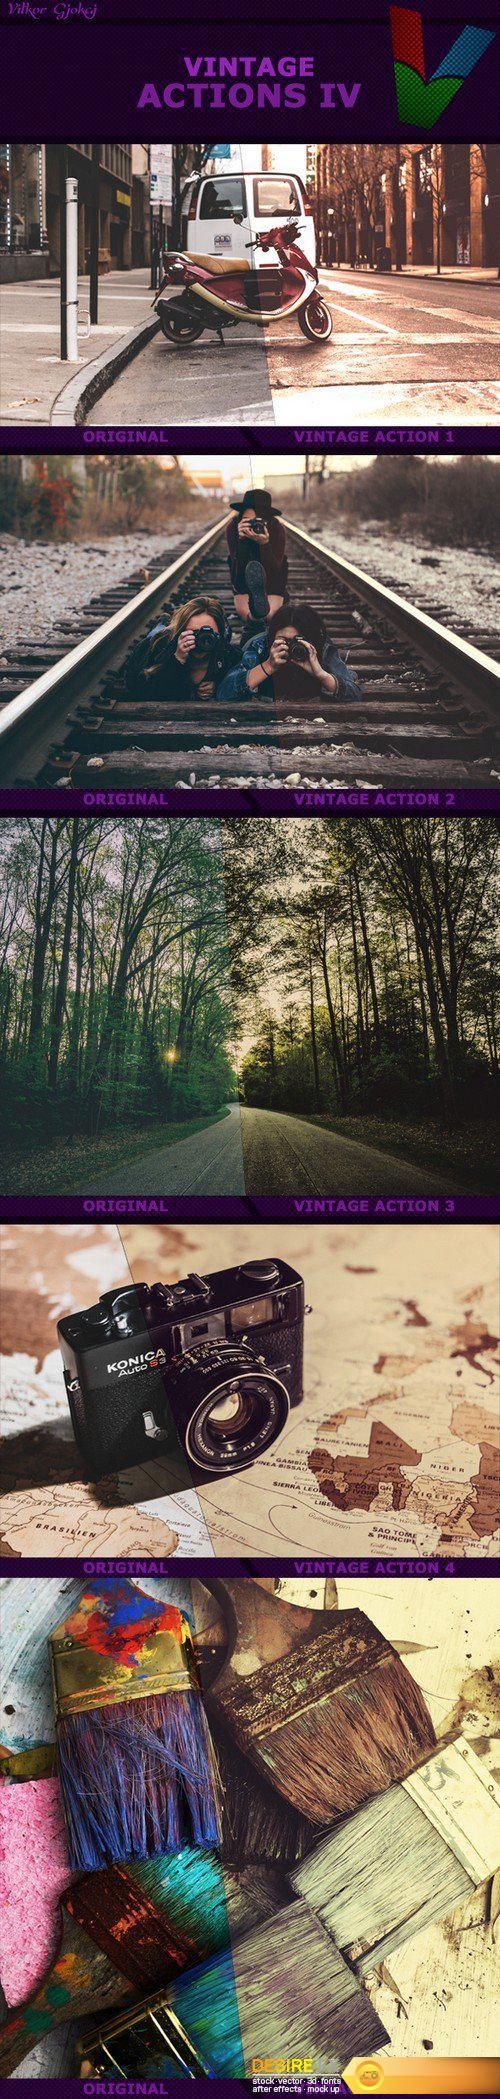 Graphicriver - Vintage Actions IV 15842760